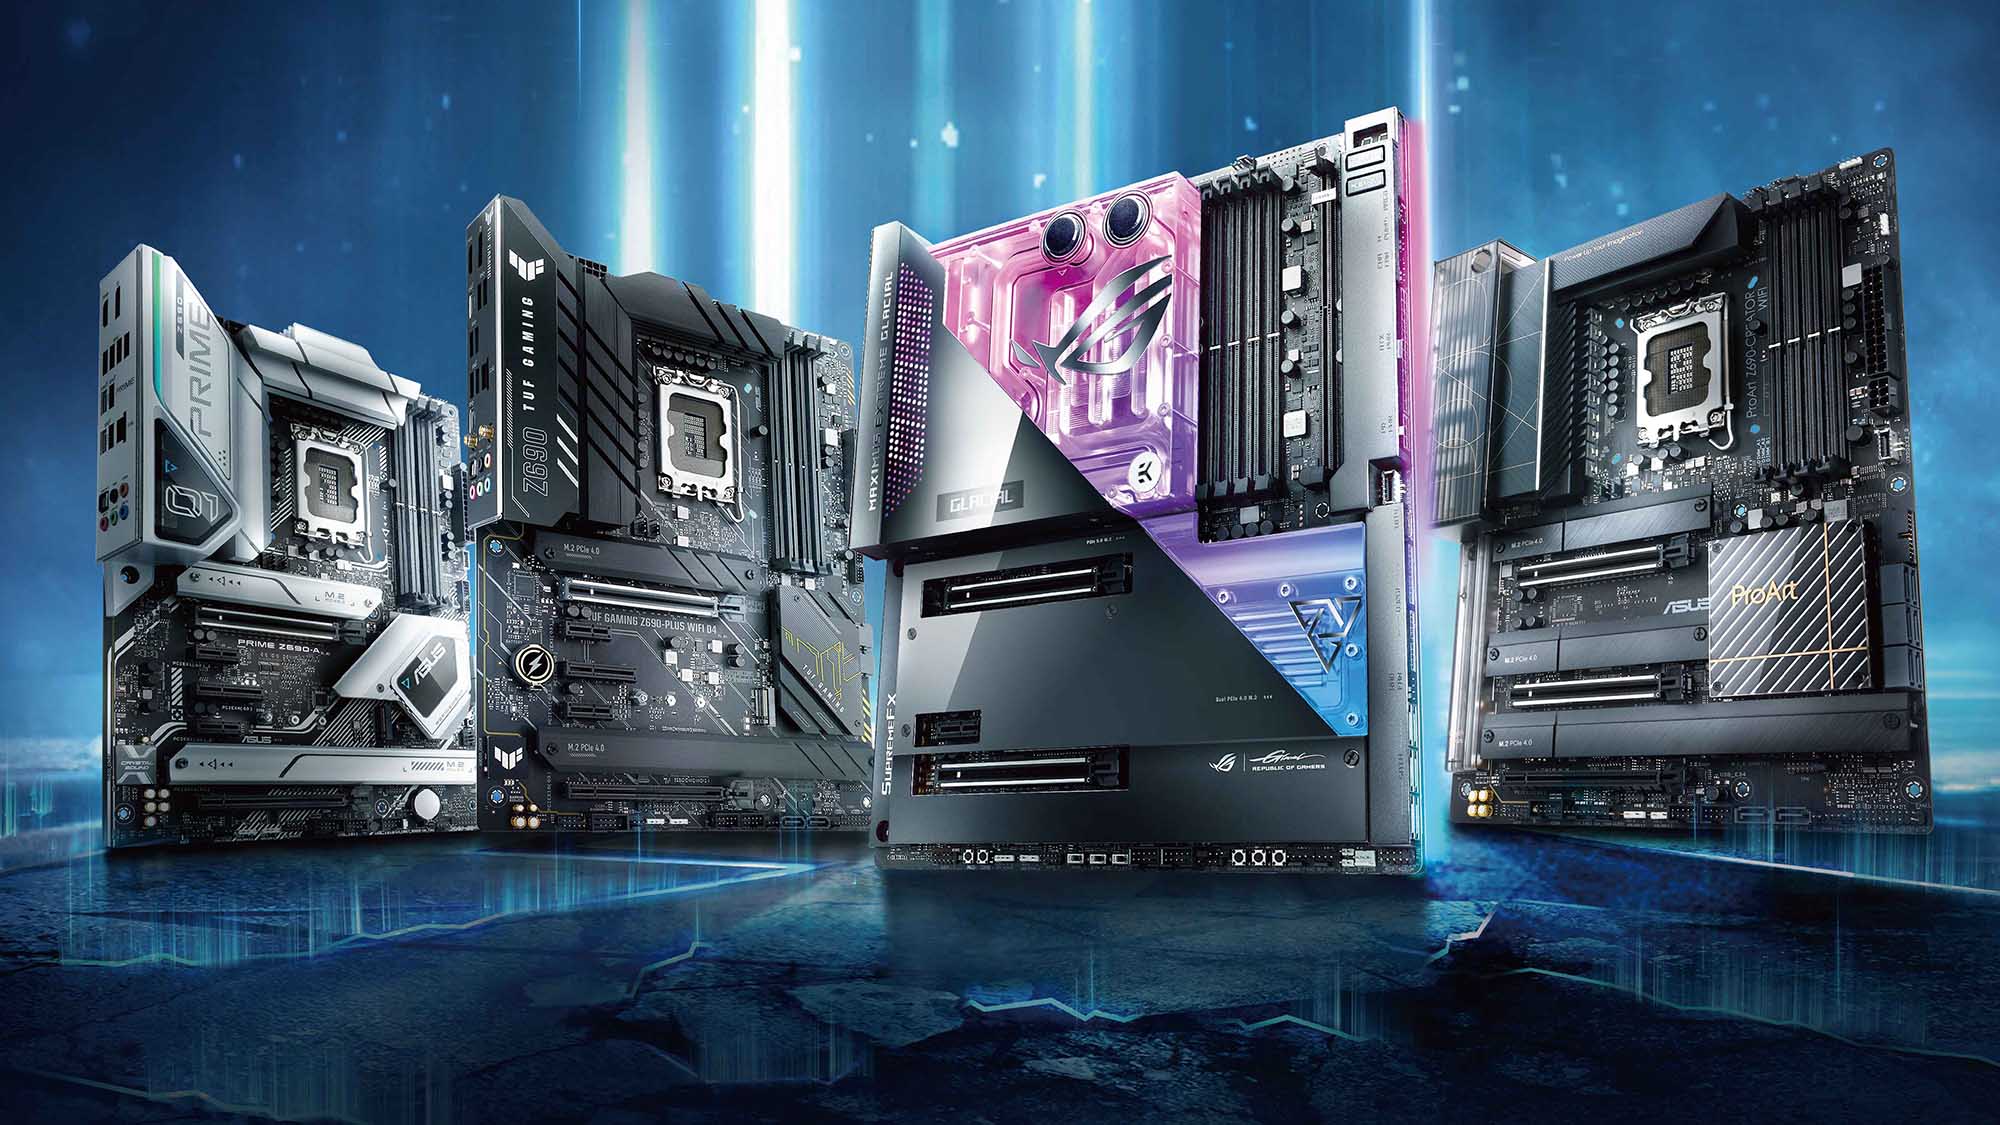 ROG Z690 motherboard guide: upgrade to next-gen with ROG Maximus and ROG Strix